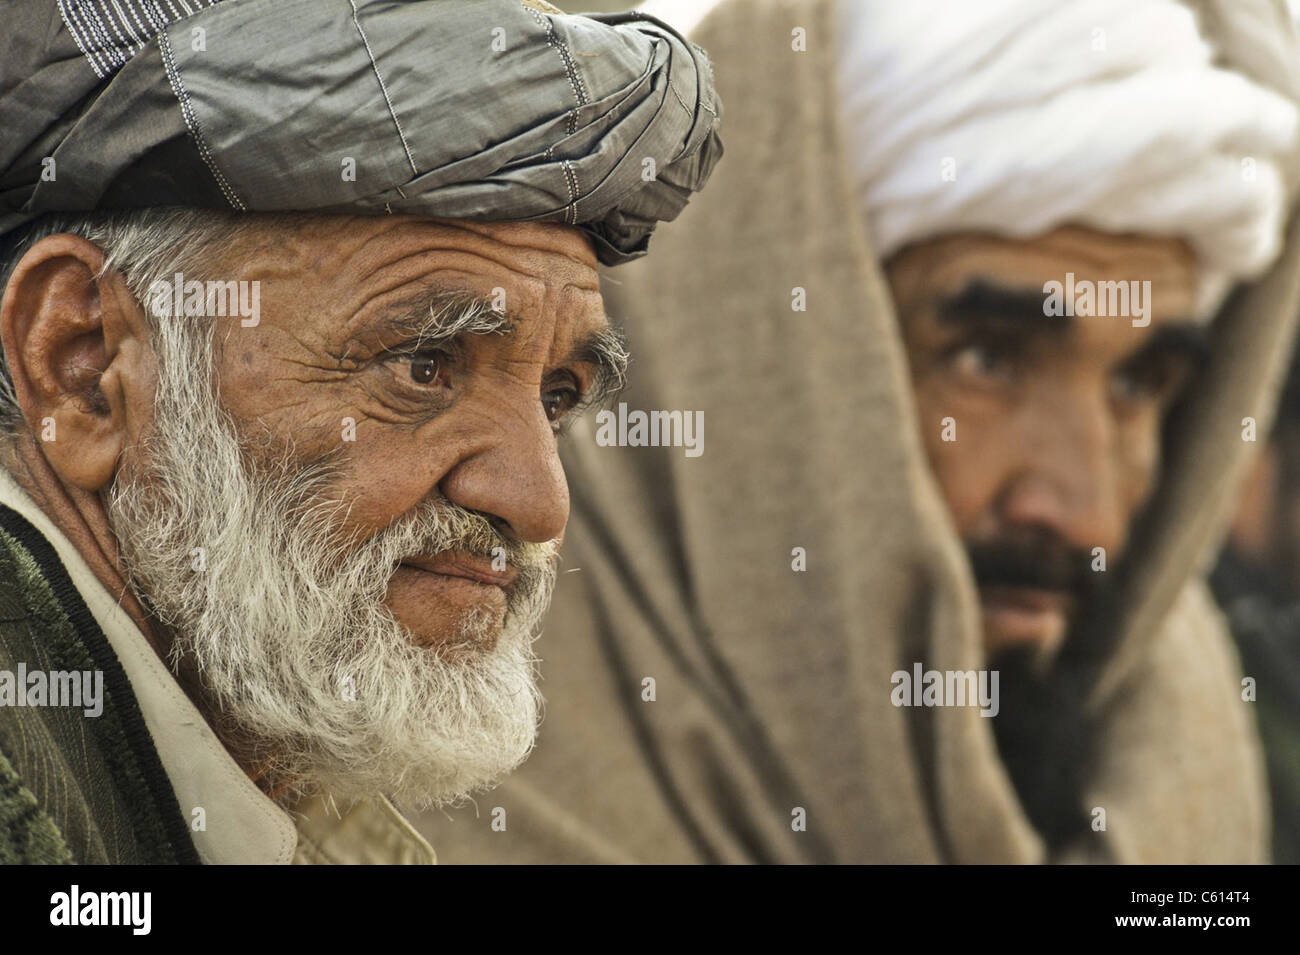 Afghan elders listen to U.S. Soldiers at headquarters for the Afghan border police in Kandahar Province Afghanistan Dec. 22 2009., Photo by:Everett Collection(BSLOC 2011 6 95) Stock Photo